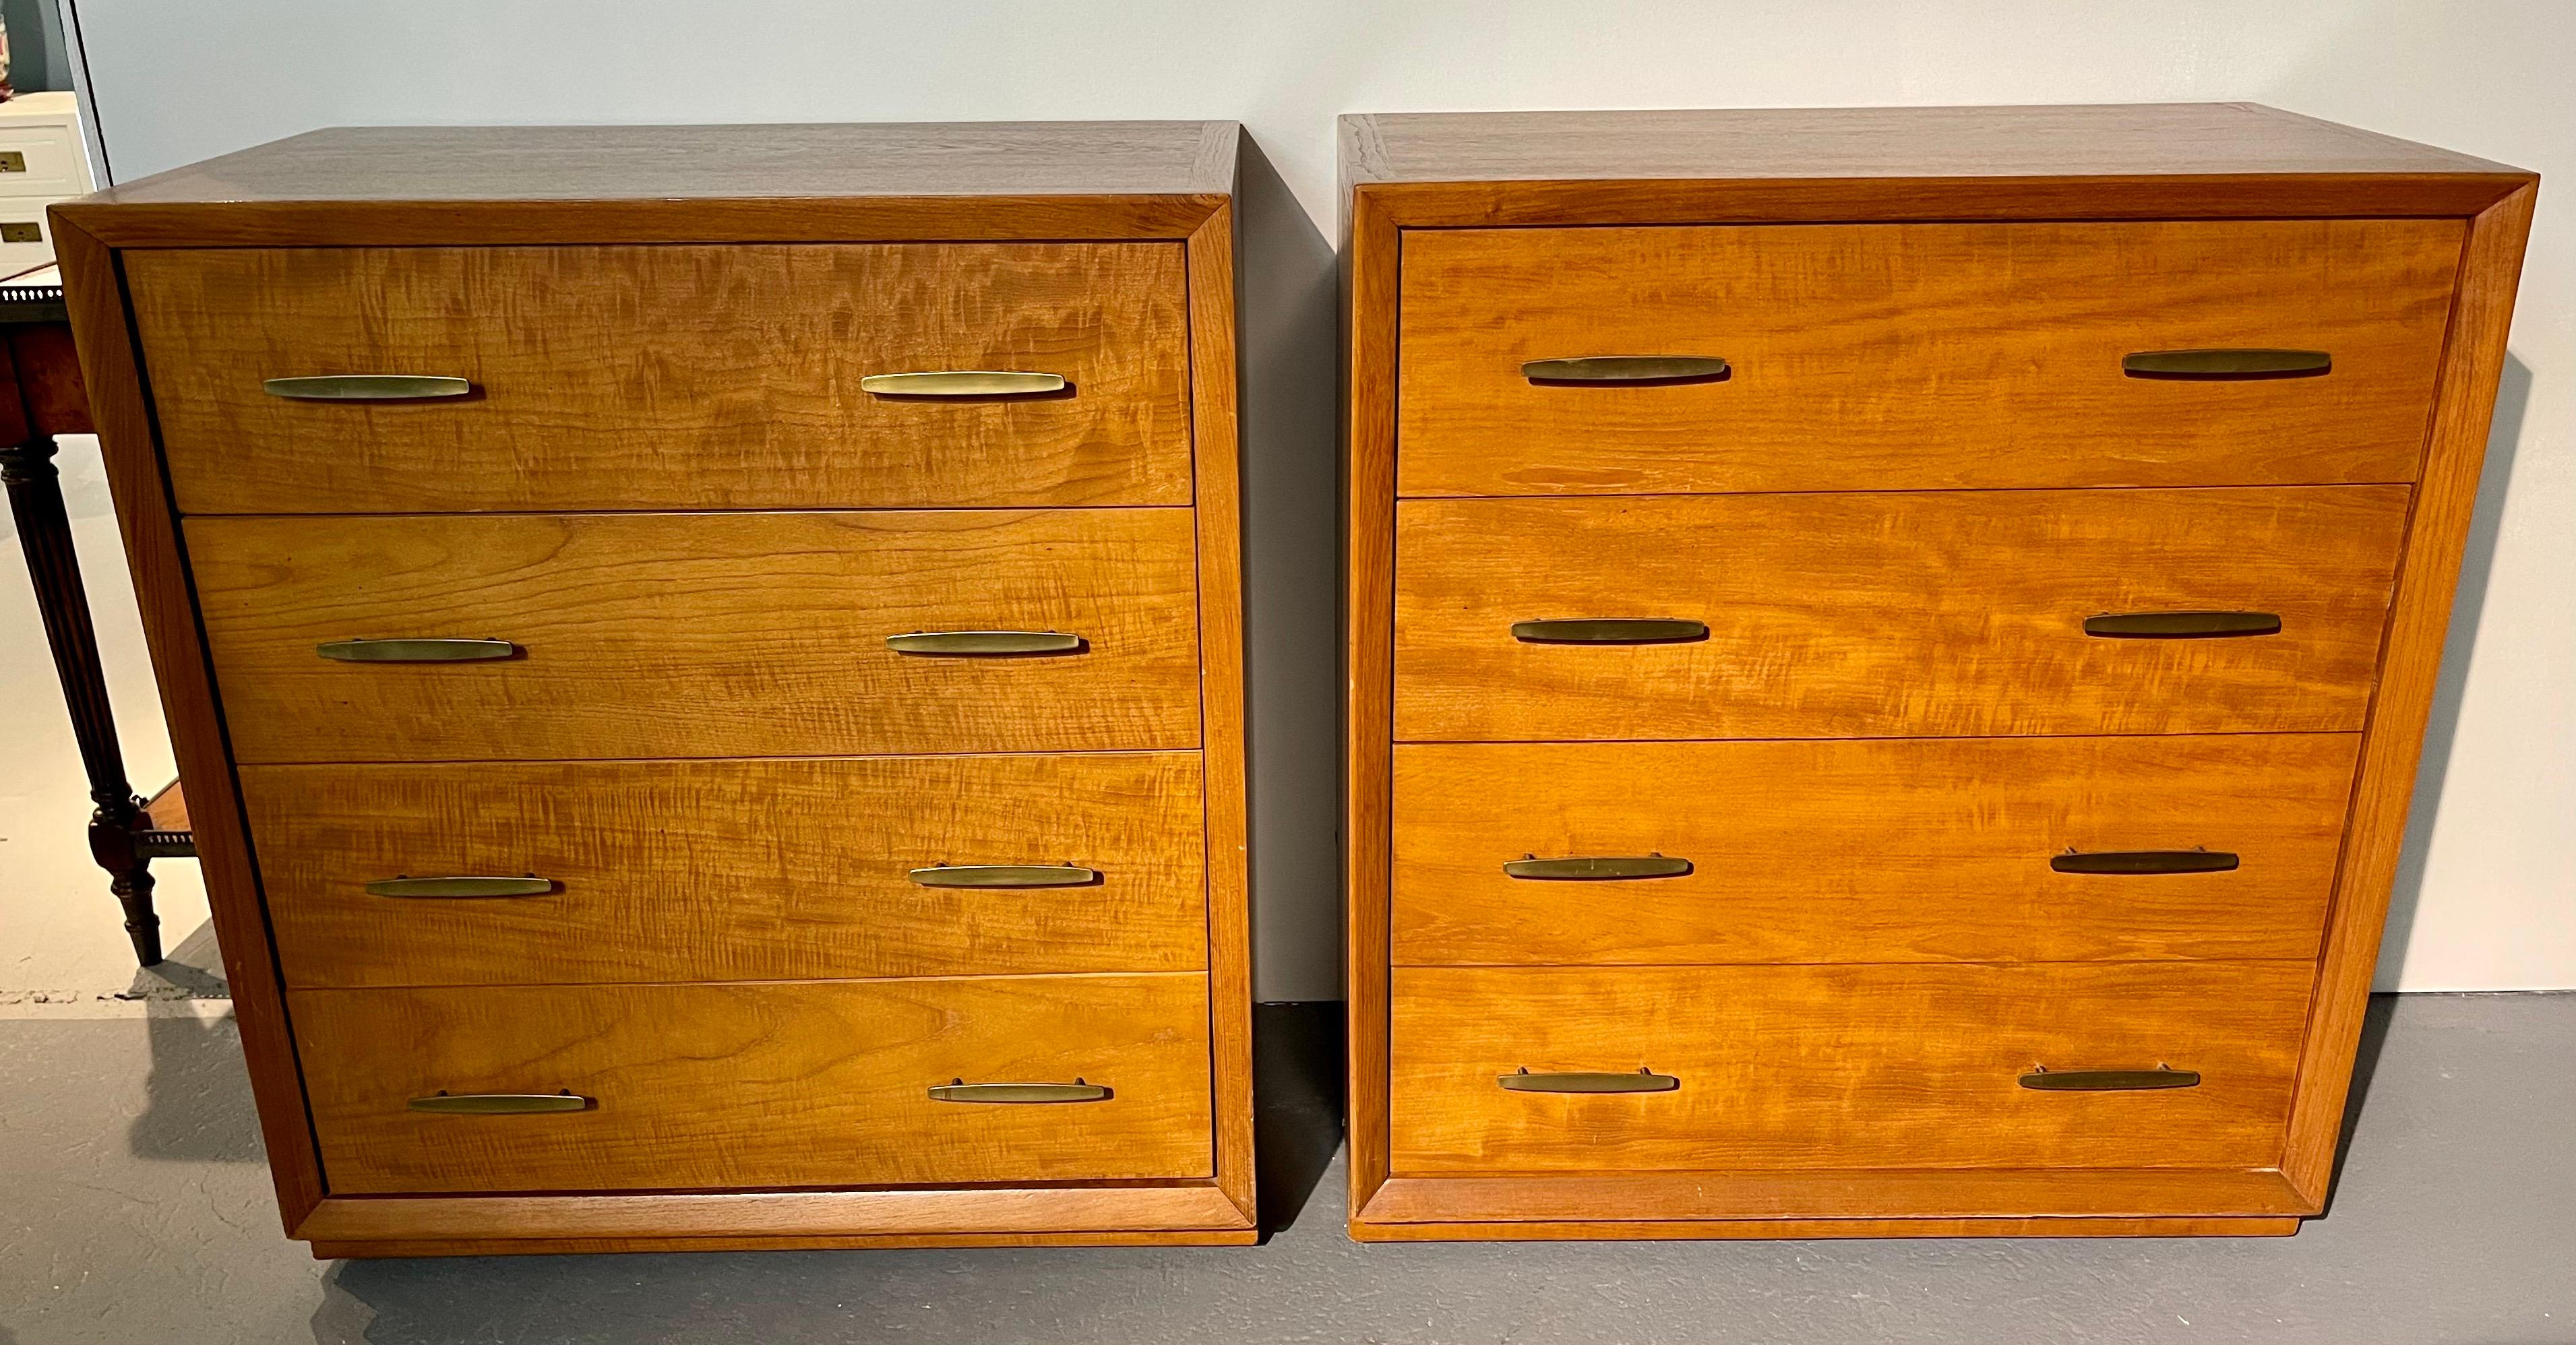 Stylish pair of matching teak and walnut mid century dressers with sleek hardware. Dovetailed drawers throughout. Iconic minimalist design perfect for any home or apartment. Own the best.